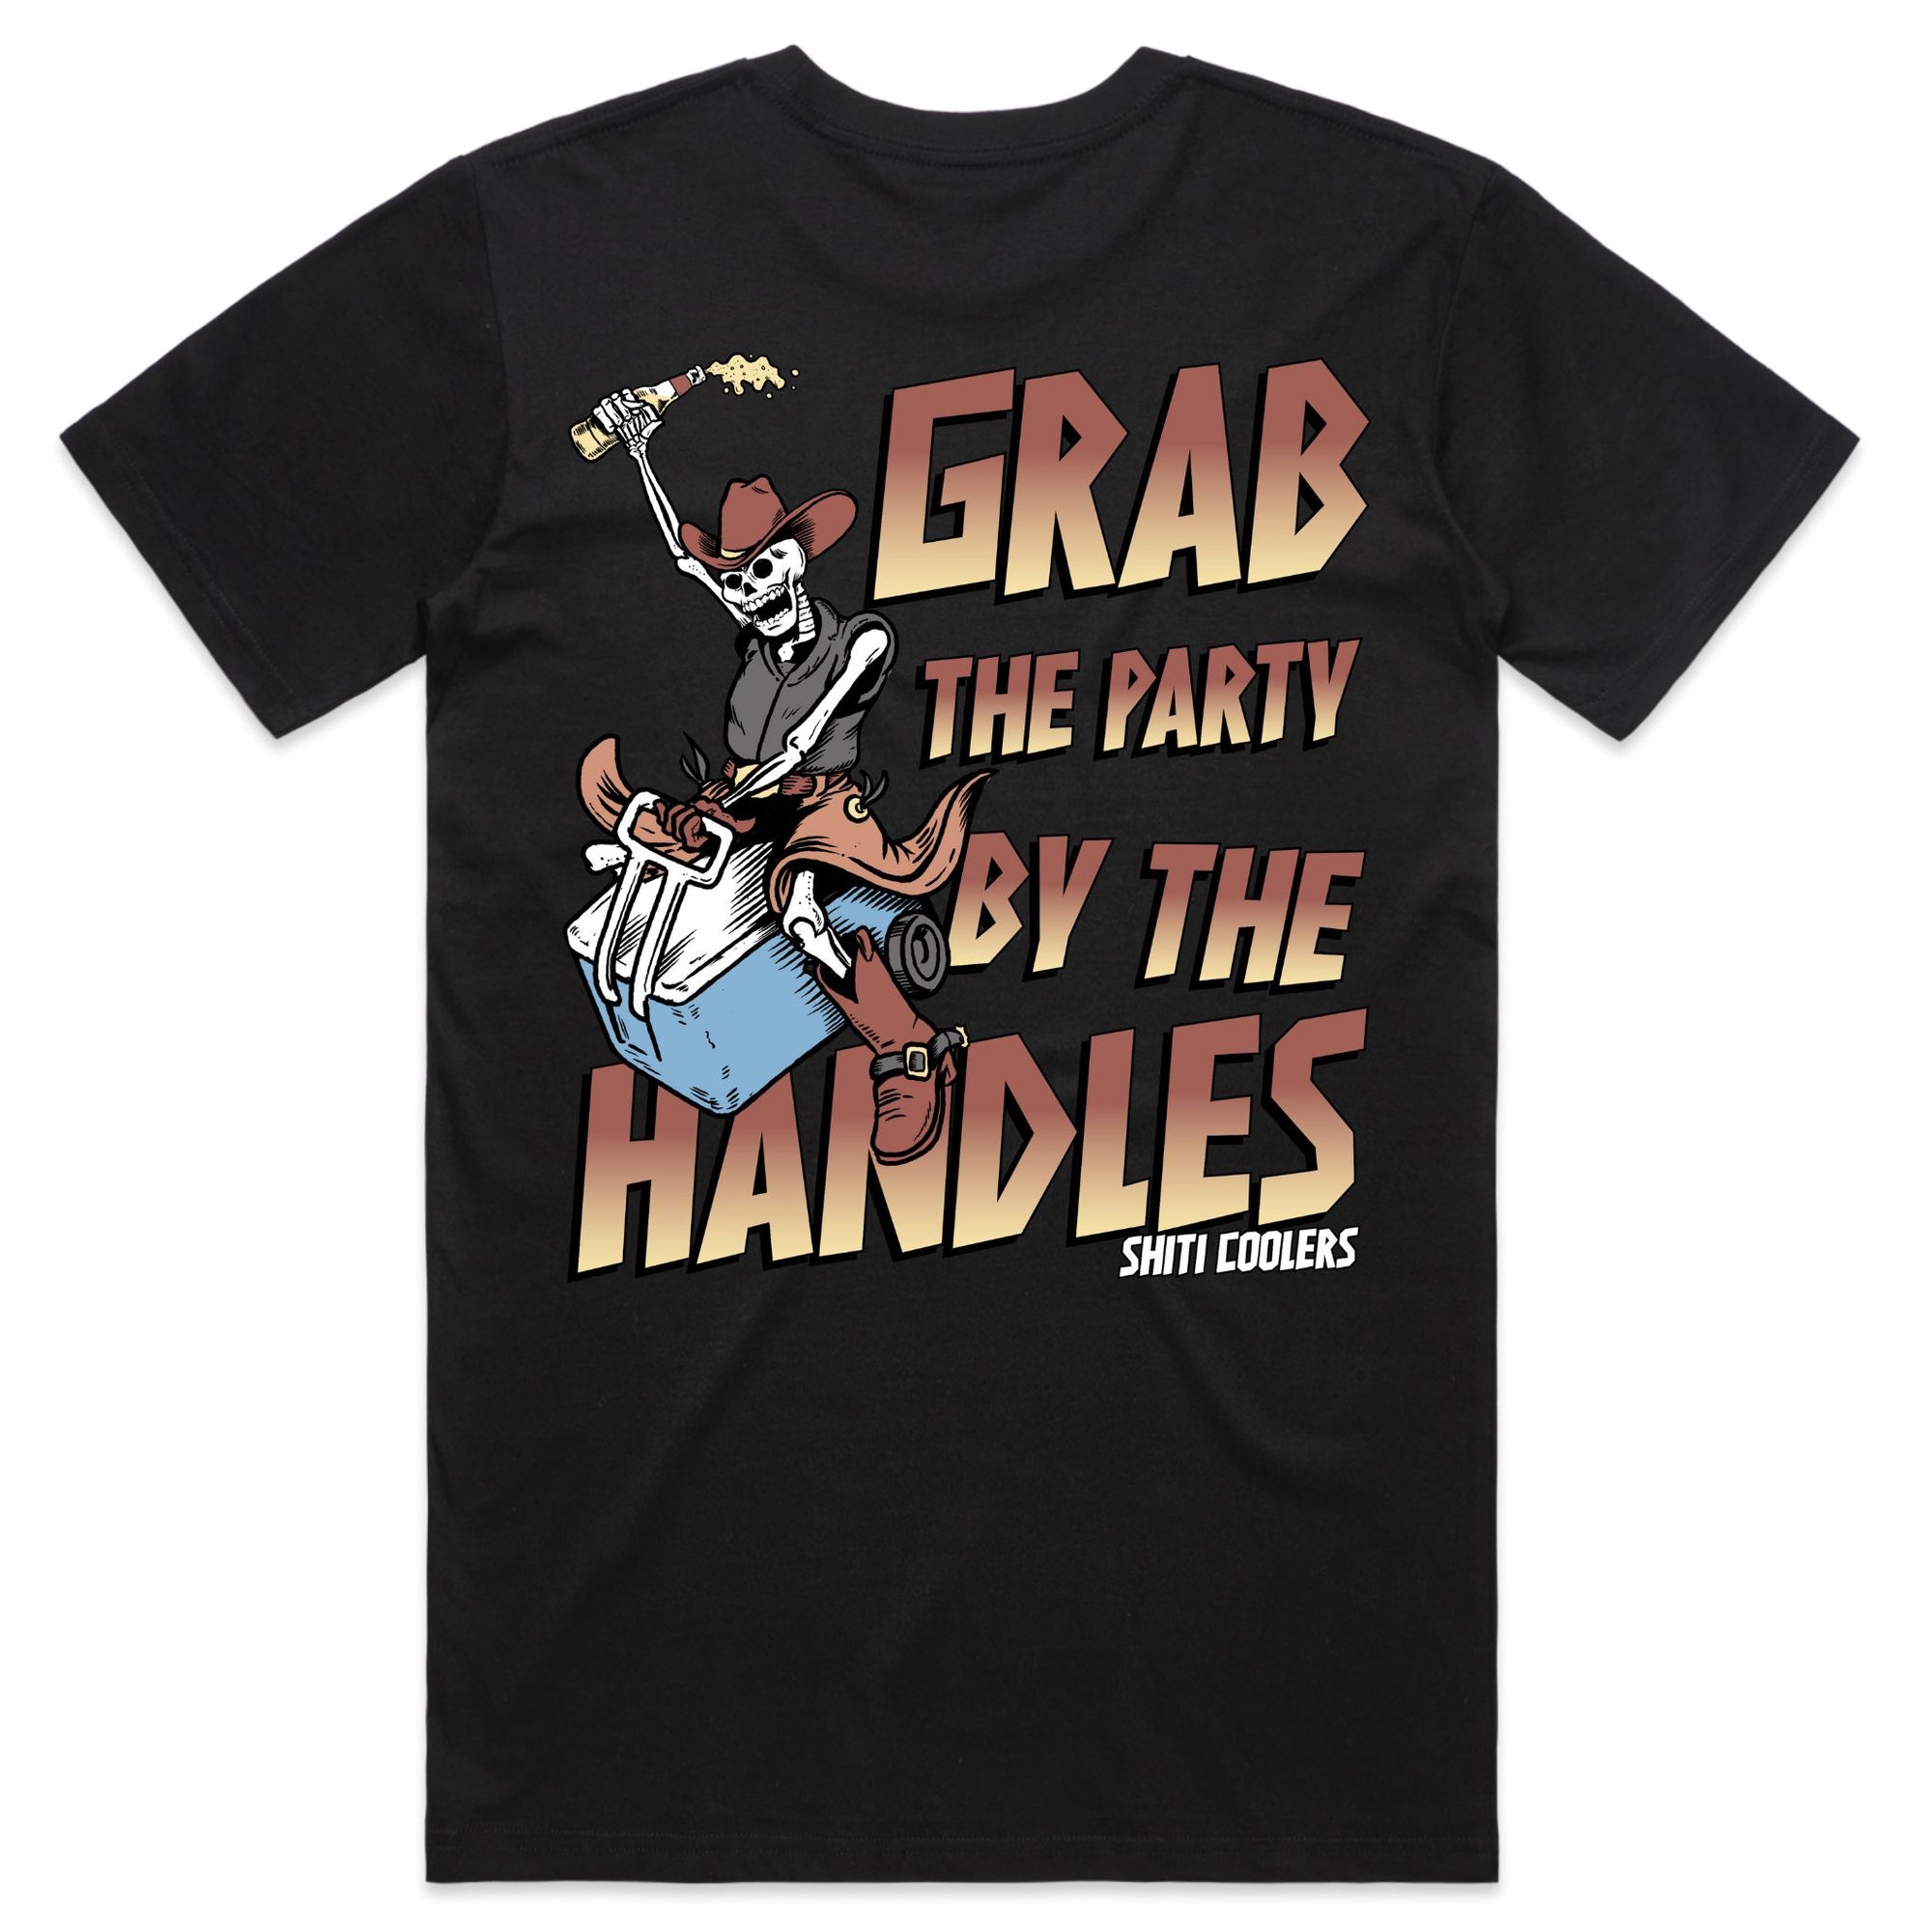 By the Handles T-Shirt